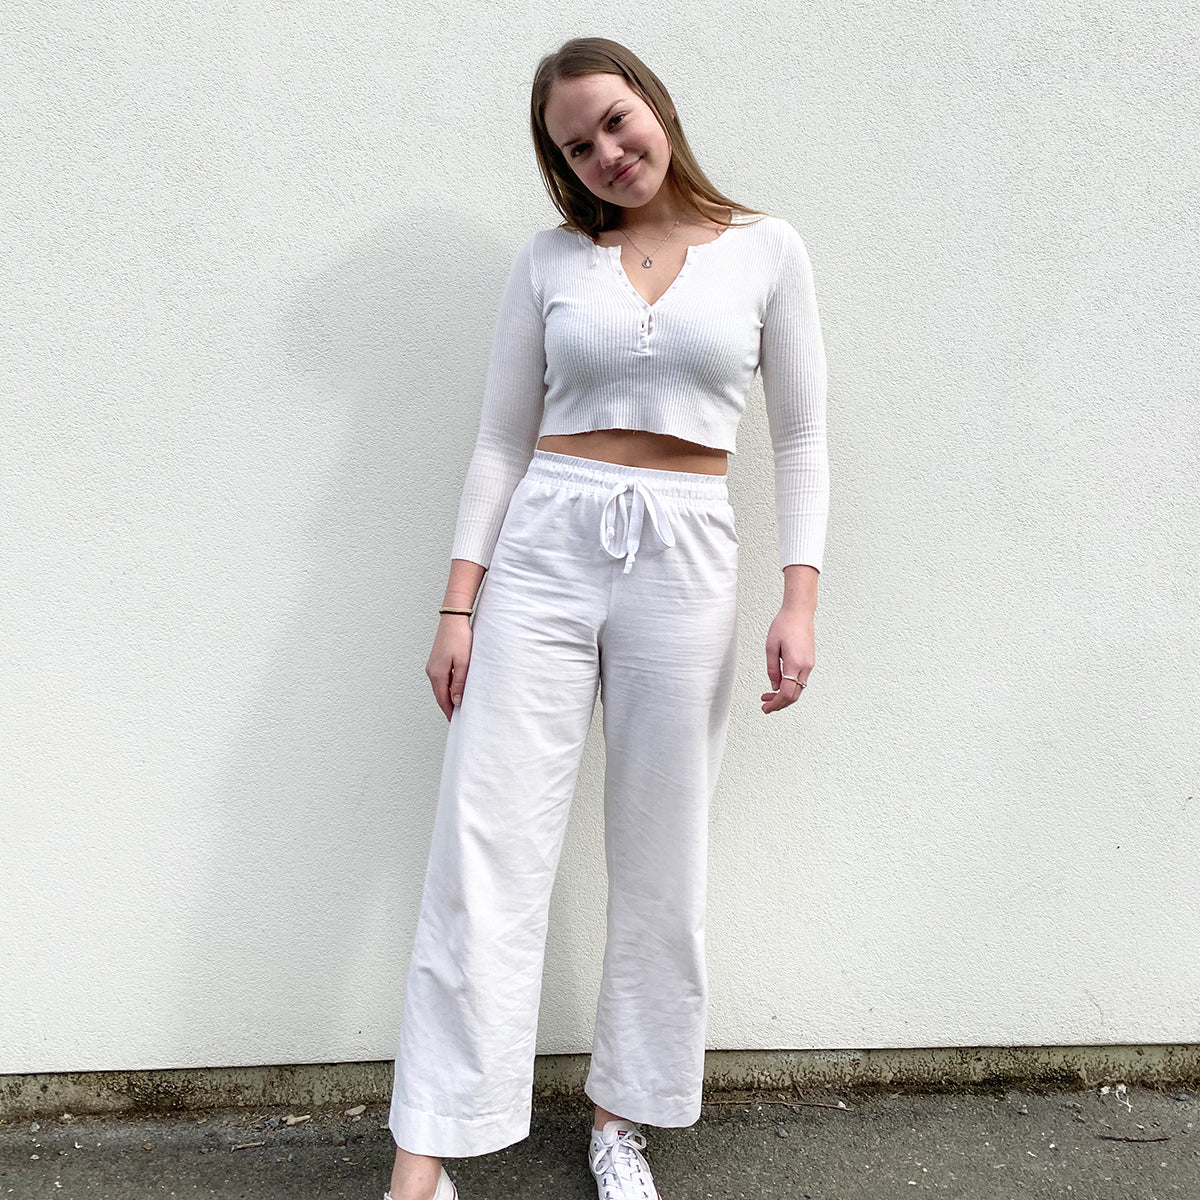 Stella Claire linen wide leg pants. Sustainably made in New Zealand.